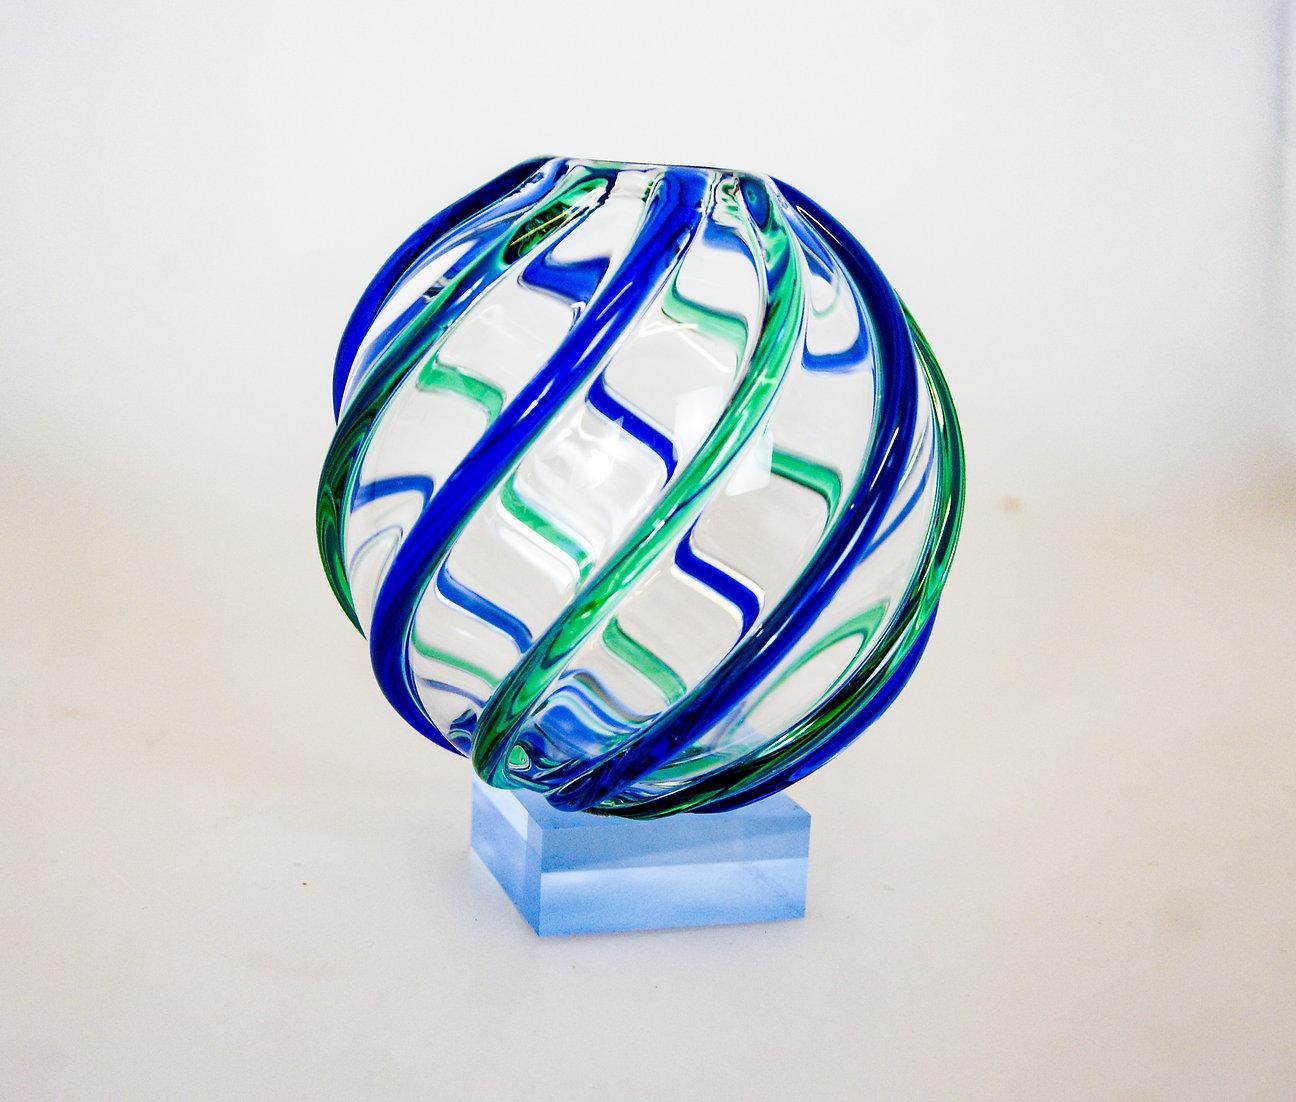 Delightful Murano glass vase by Archimede Seguso for Seguso.
Small round chunky blown glass with appliqué textured ribbed blue and green stripes running through.
Very intricately blown with all the stripes in sequence, rather hypnotic when seen on